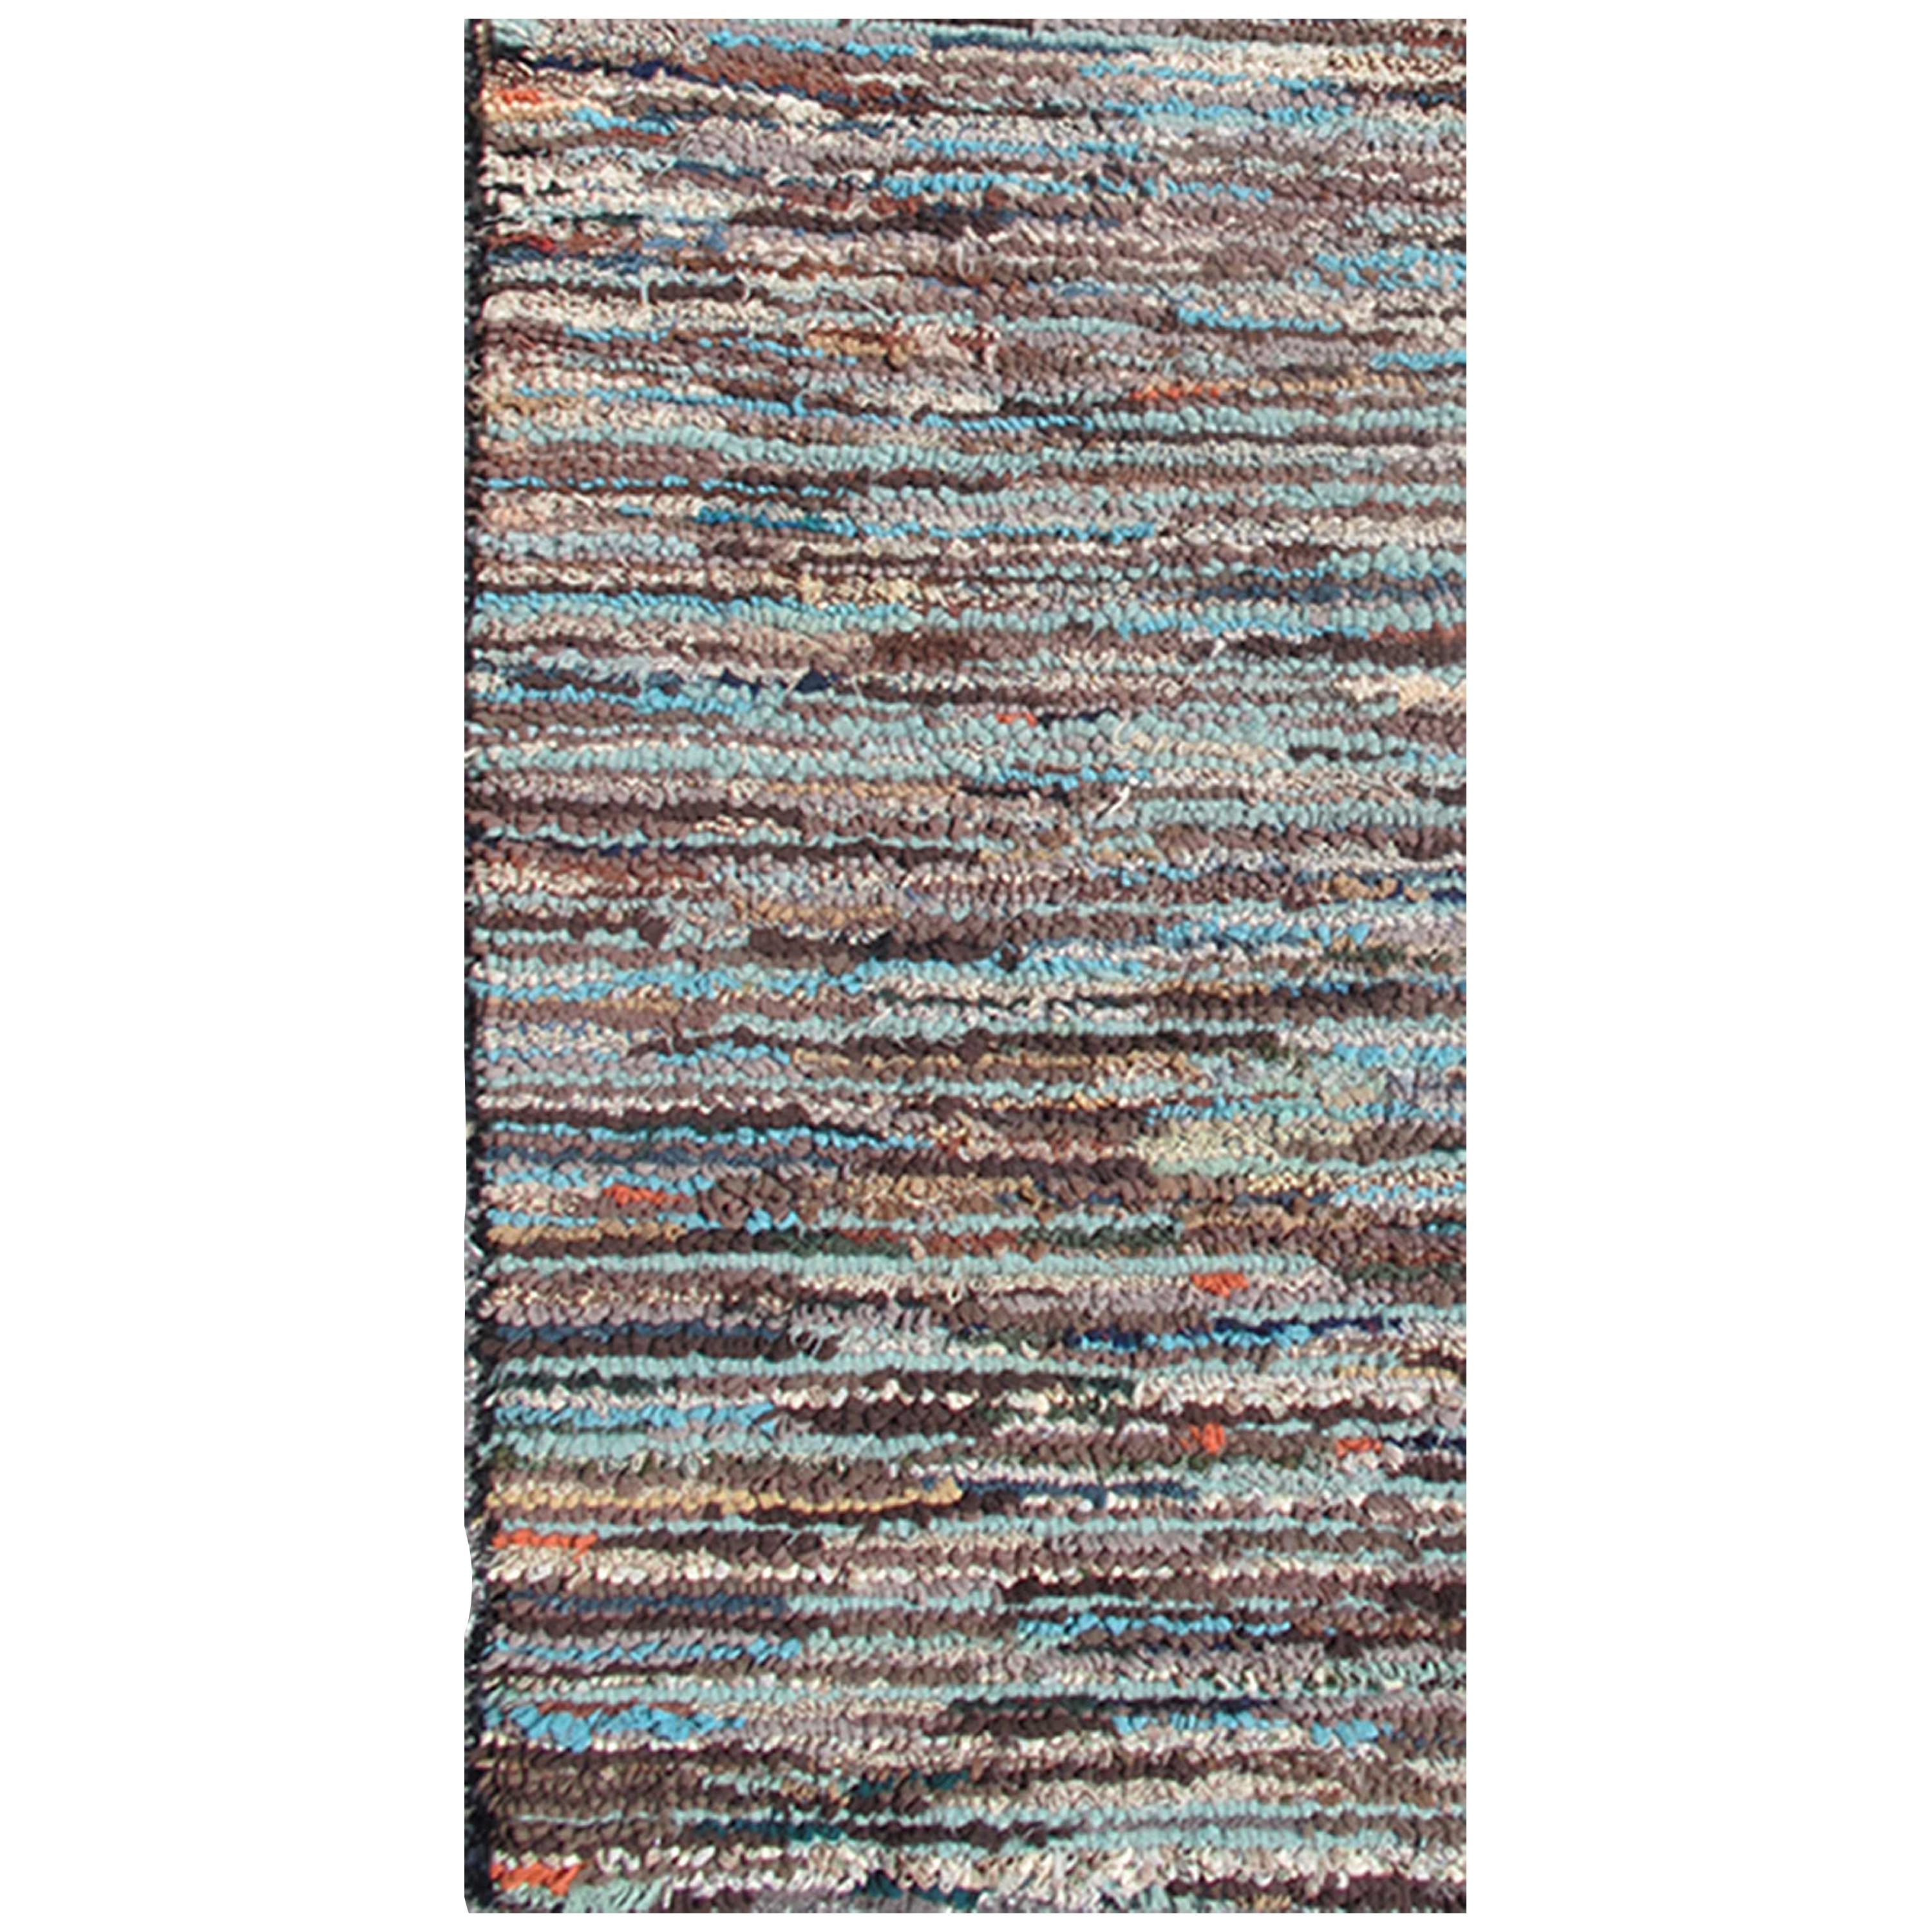 Very Long American Hooked Runner with Variegated Design in Blue, Brown and Taupe